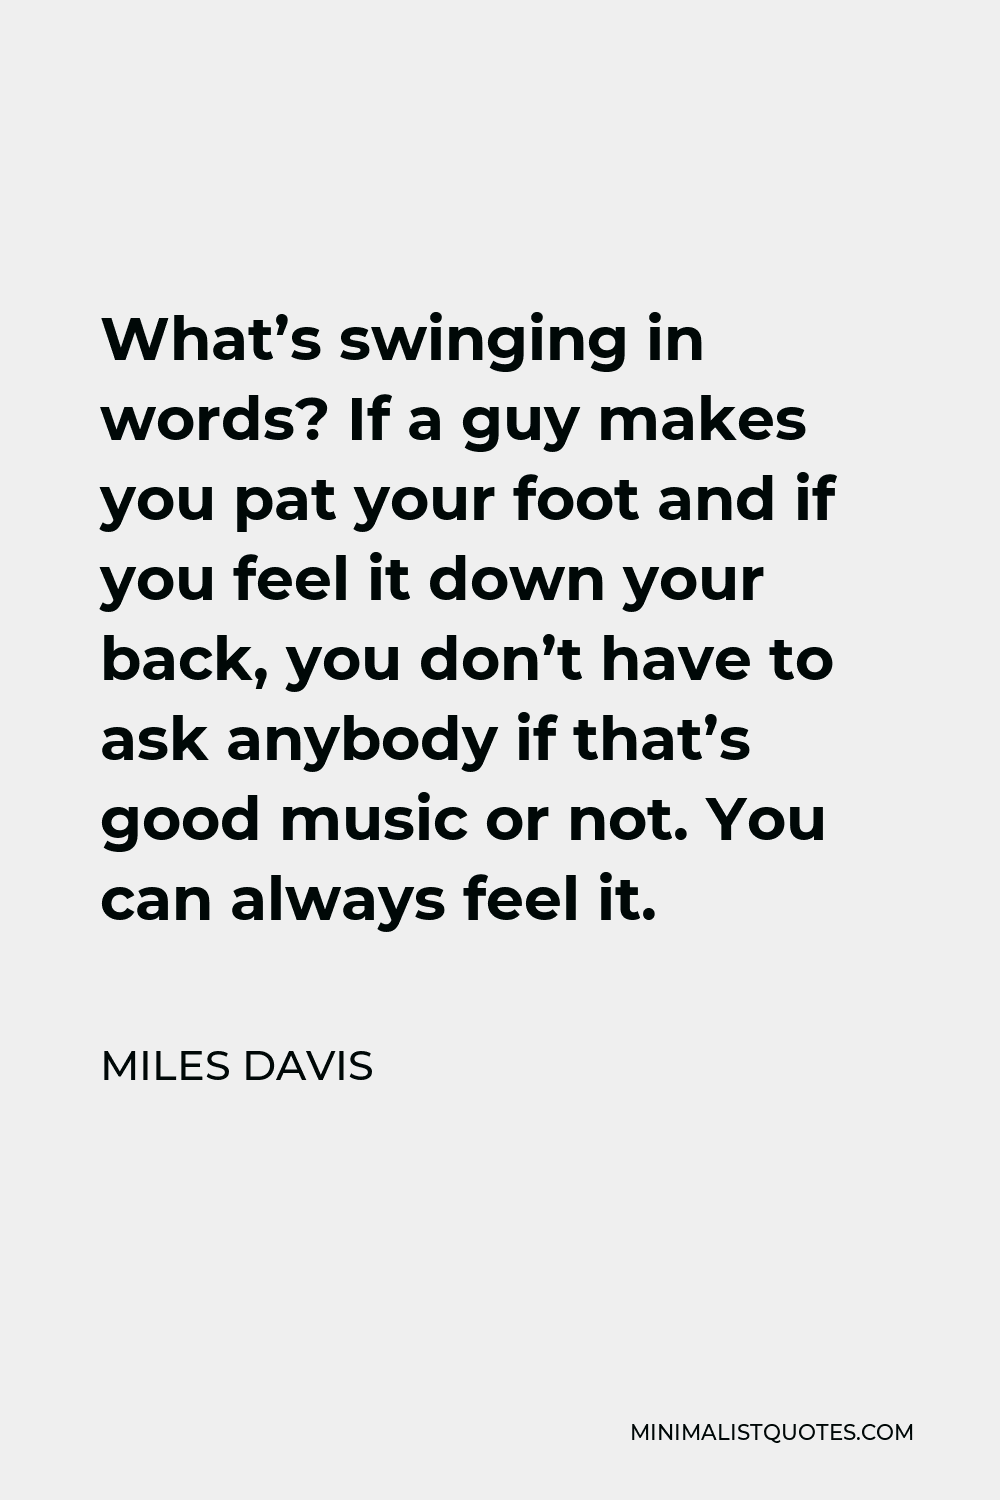 Miles Davis Quote - What’s swinging in words? If a guy makes you pat your foot and if you feel it down your back, you don’t have to ask anybody if that’s good music or not. You can always feel it.